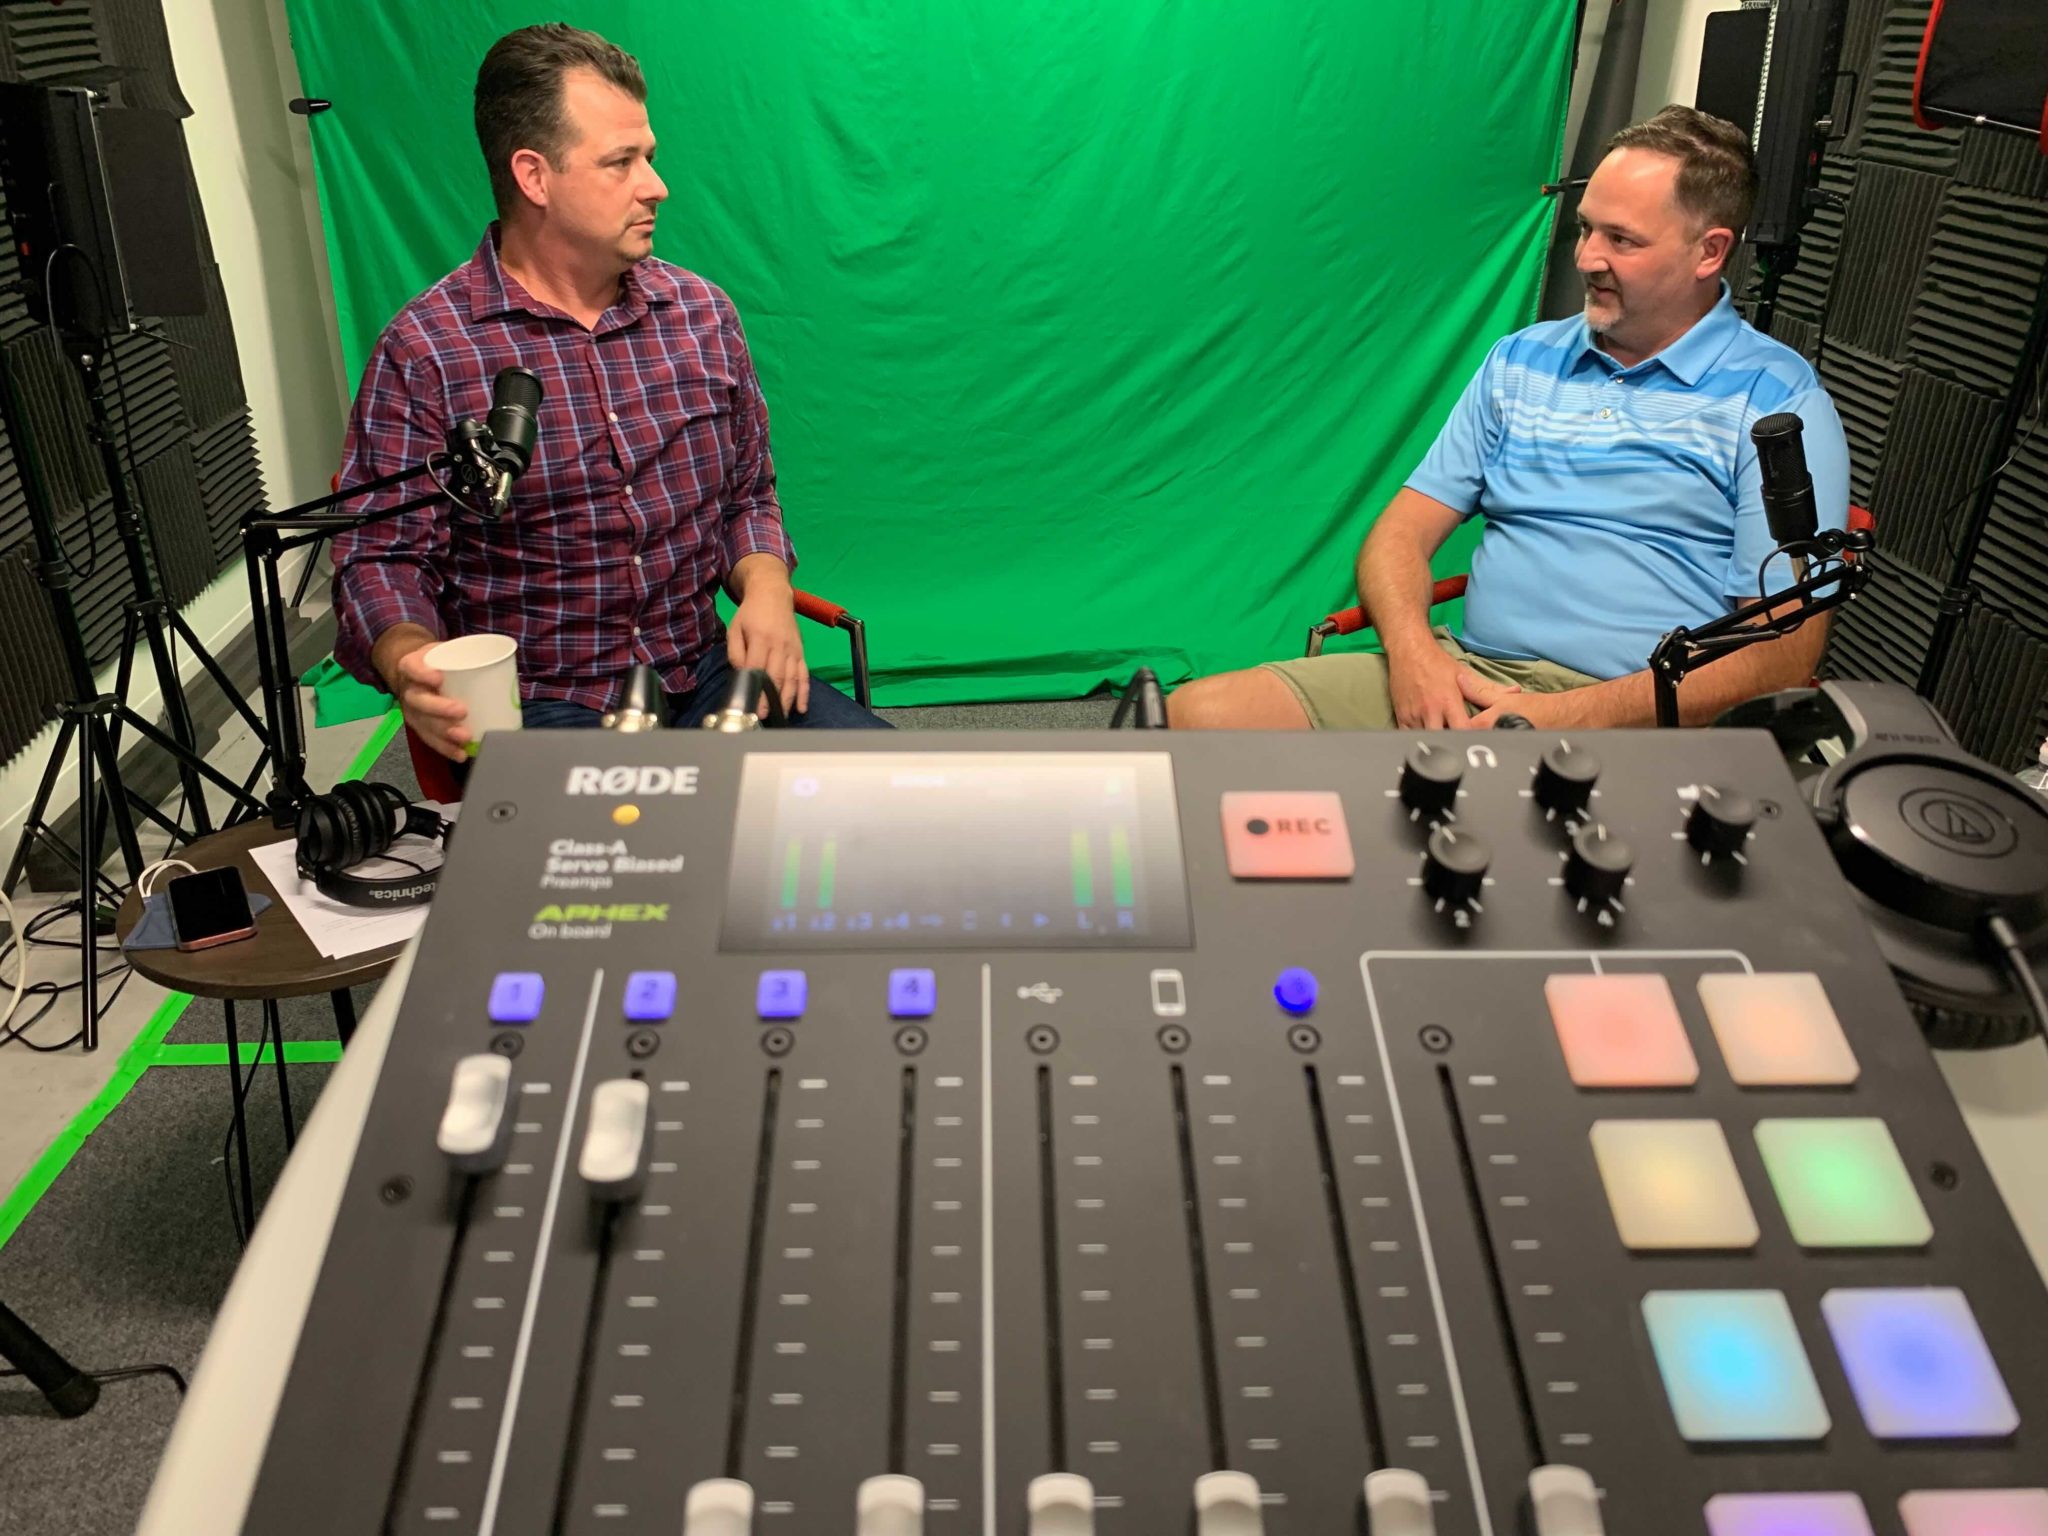 In the foreground sits a Rode podcast recorder, with guests Jason Ward and Scott Sendelweck in front of a green screen. Jason is white male in his 40's with brown hair, wearing a plaid button down shirt. Scott Sendelweck is also a white male in his 40's with brown hair and a goatee, wearing a blue striped polo and khaki shorts.